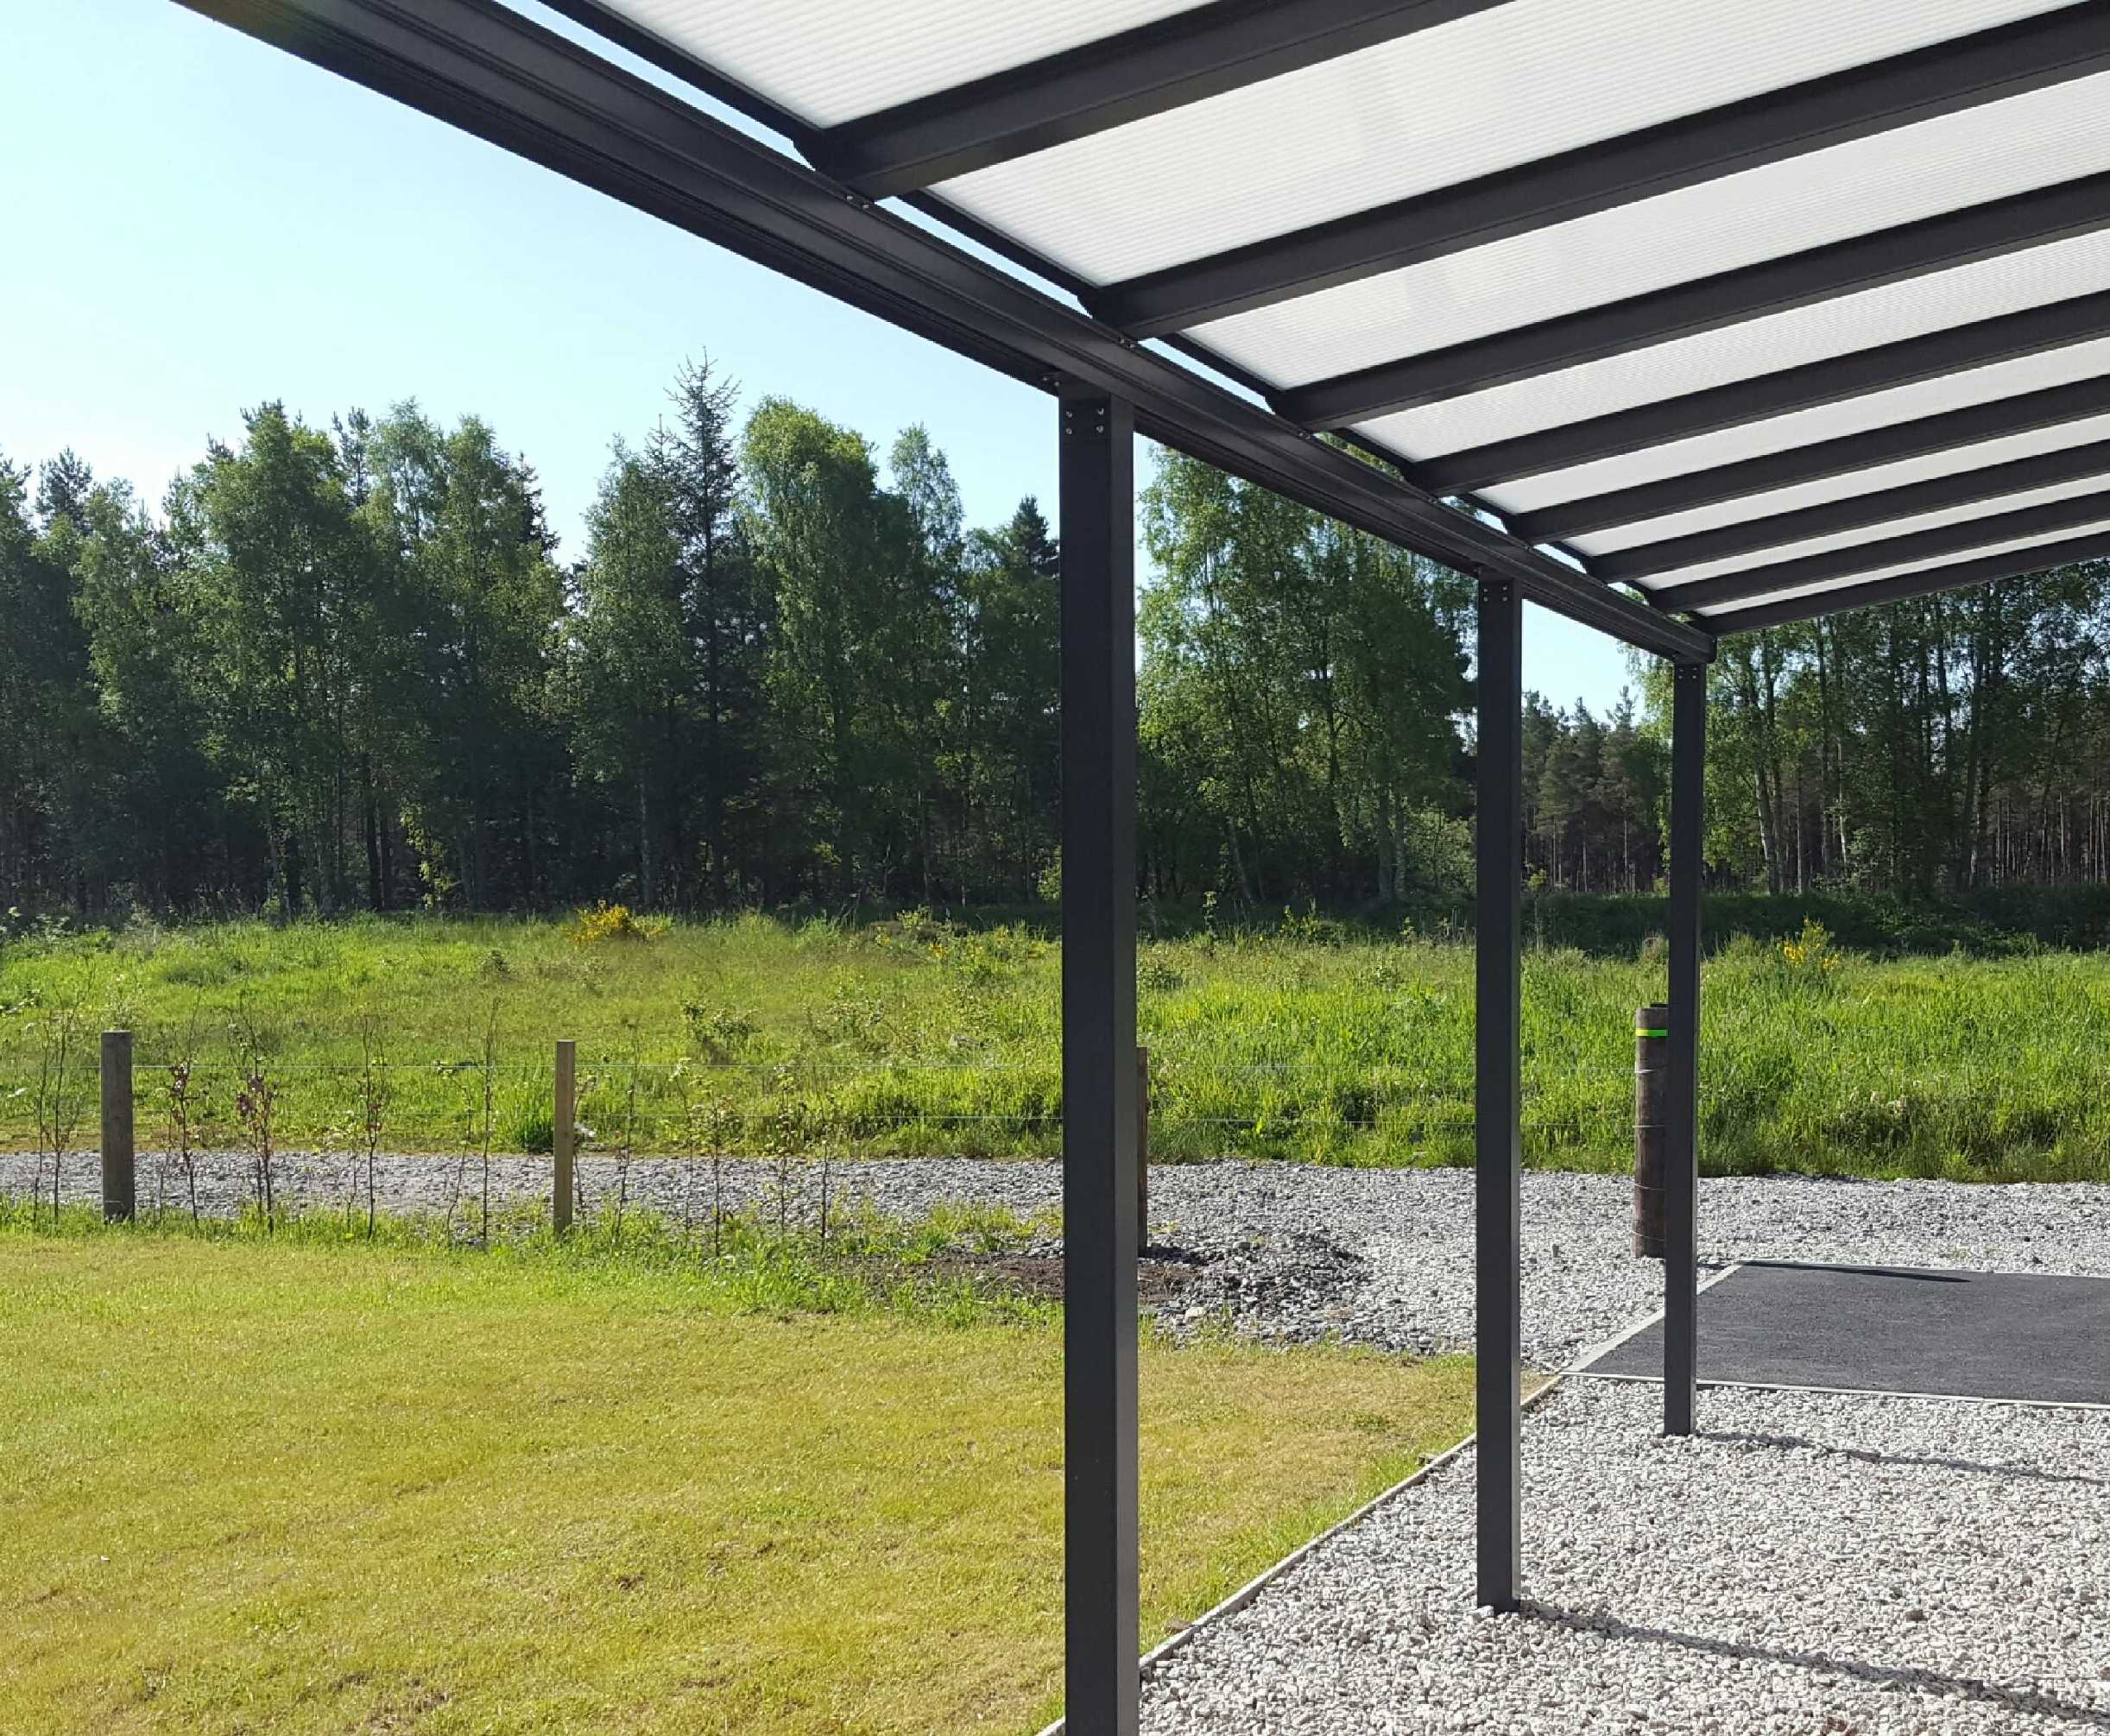 Omega Smart Lean-To Canopy, Anthracite Grey, UNGLAZED for 6mm Glazing - 9.8m (W) x 2.0m (P), (5) Supporting Posts